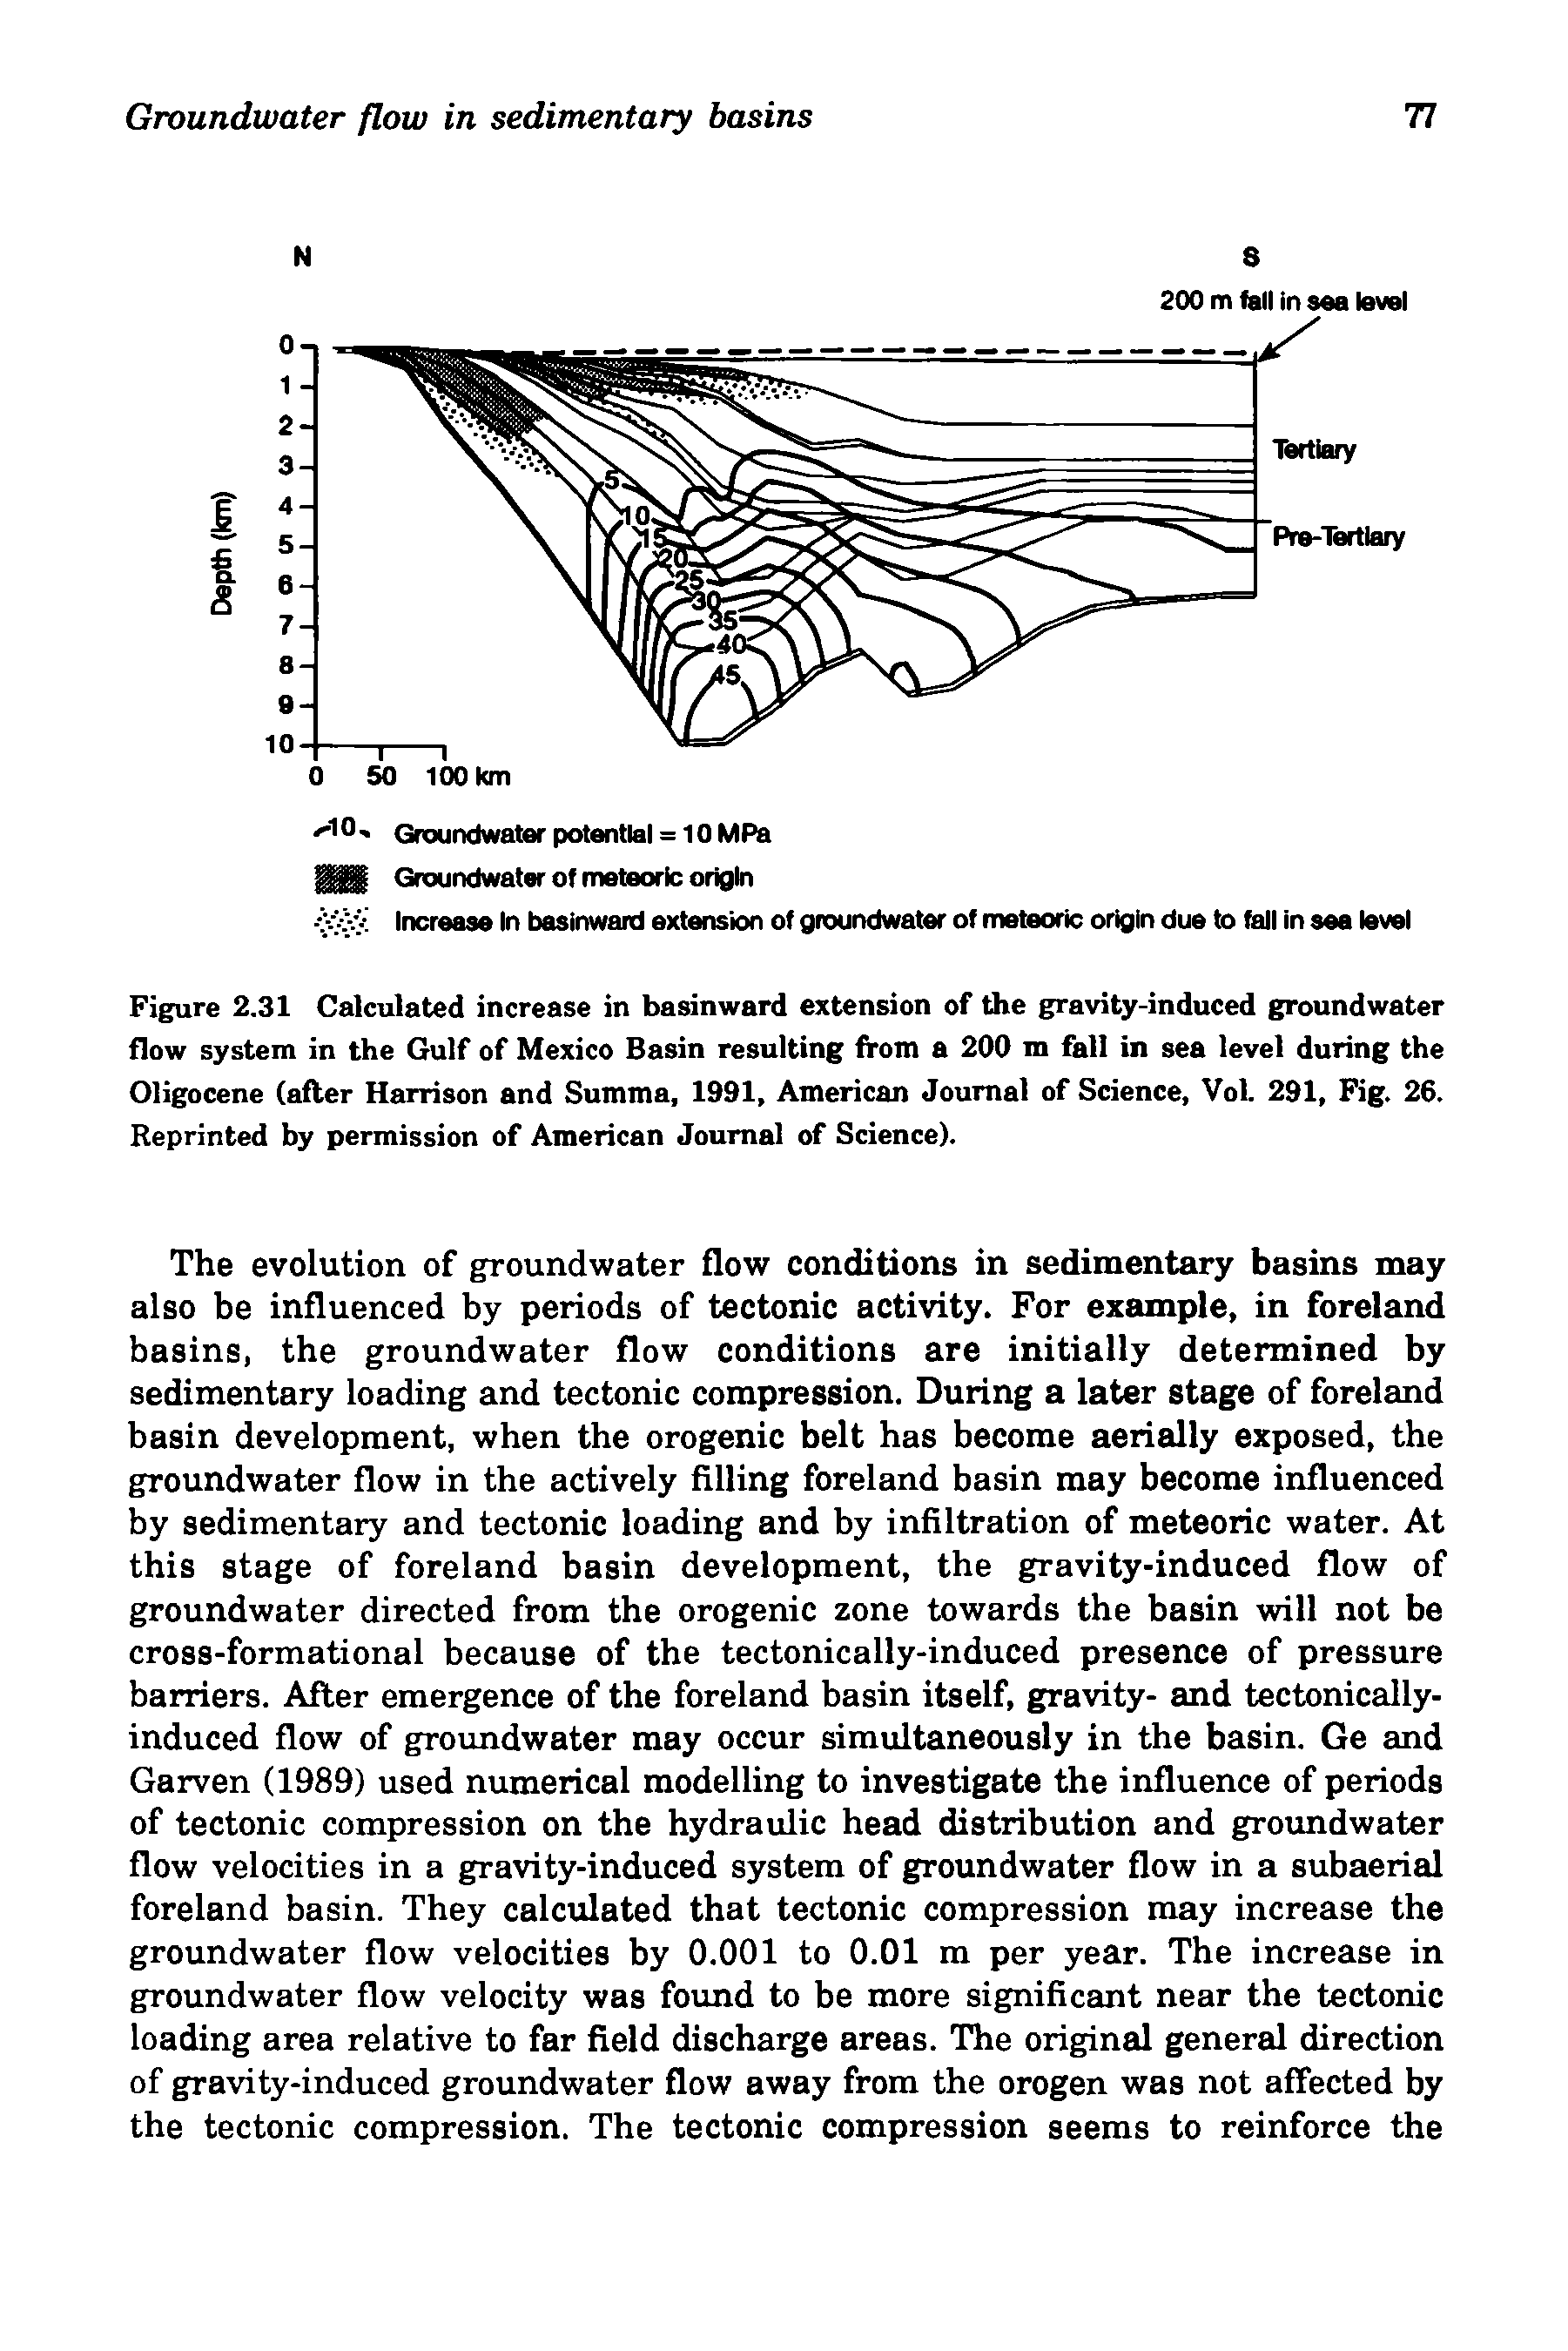 Figure 2.31 Calculated increase in basinward extension of the gravity-induced groundwater flow system in the Gulf of Mexico Basin resulting from a 200 m fall in sea level during the Oligocene (after Harrison and Summa, 1991, American Journal of Science, Vol. 291, Fig. 26. Reprinted by permission of American Journal of Science).